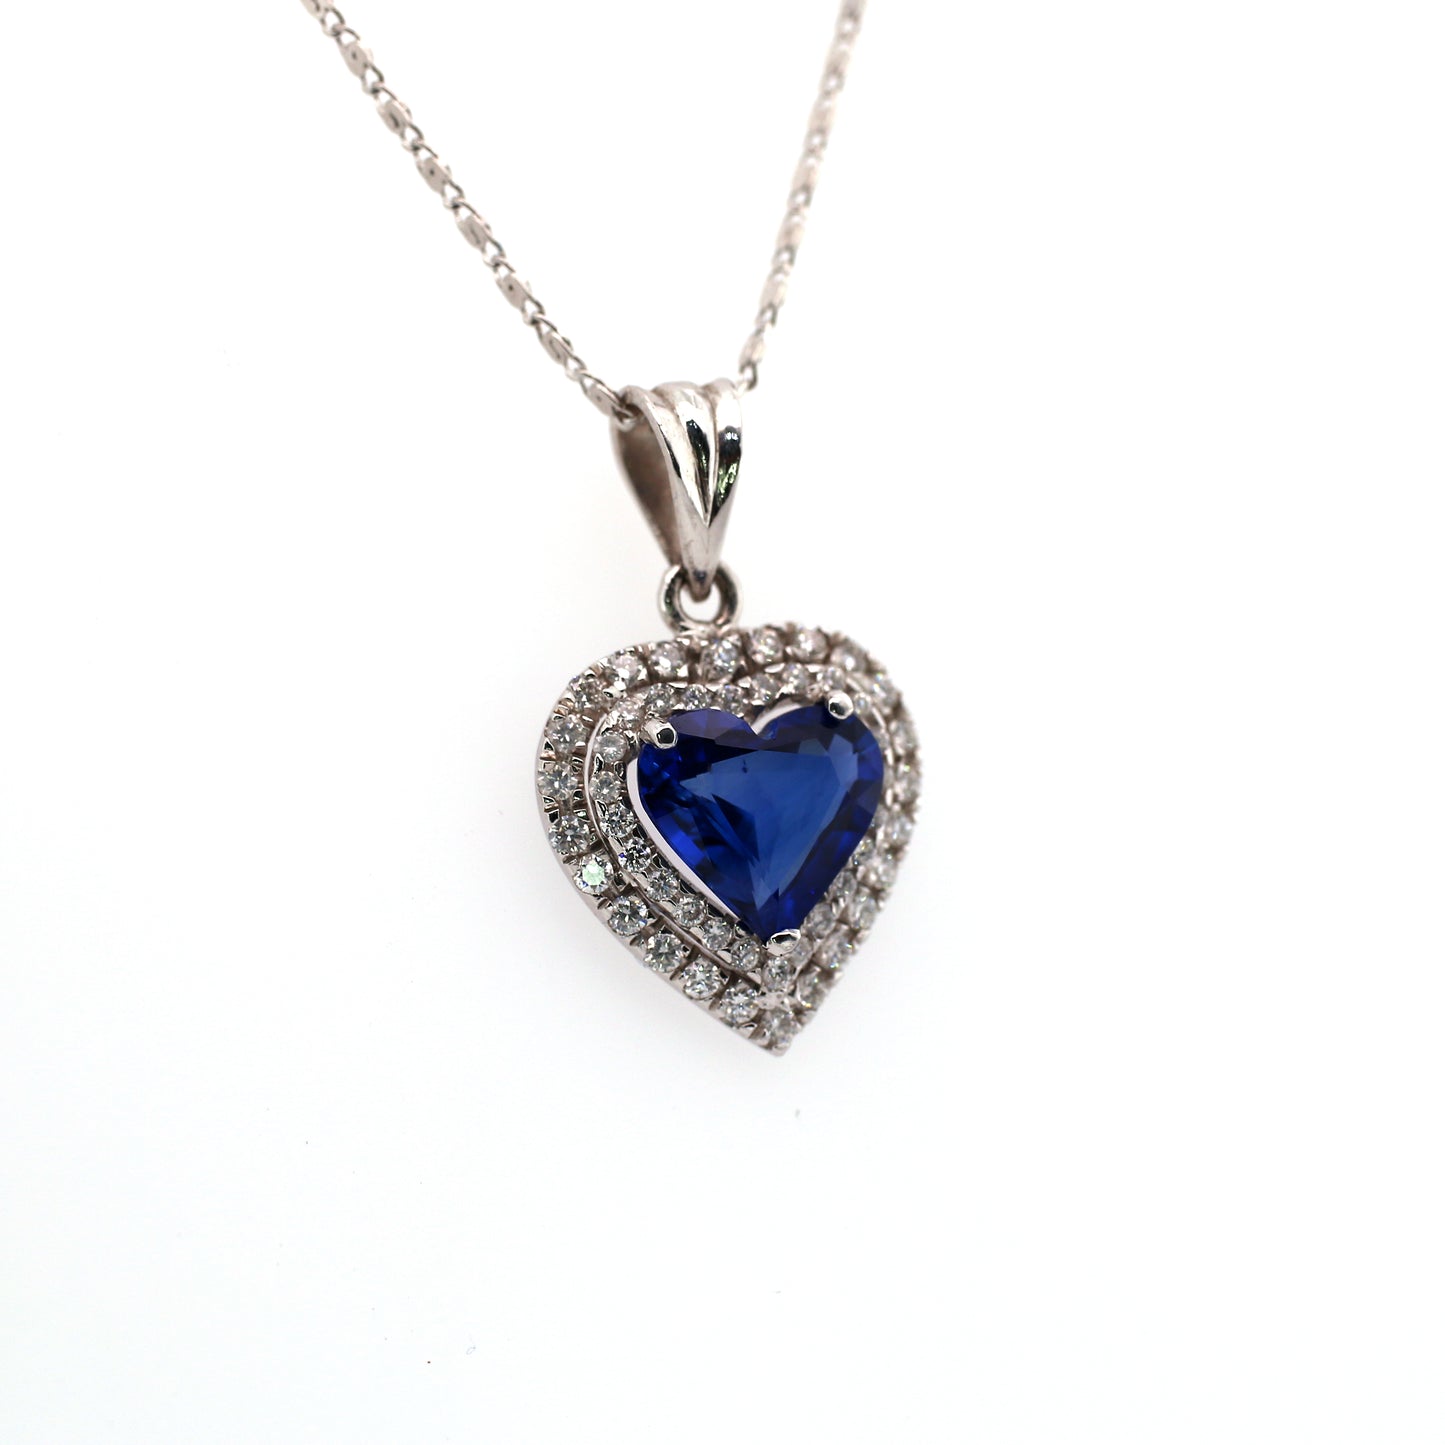 Stunning Heart Pendant Elaborated with Blue Sapphire Beauty is enhanced by addition of White Diamond